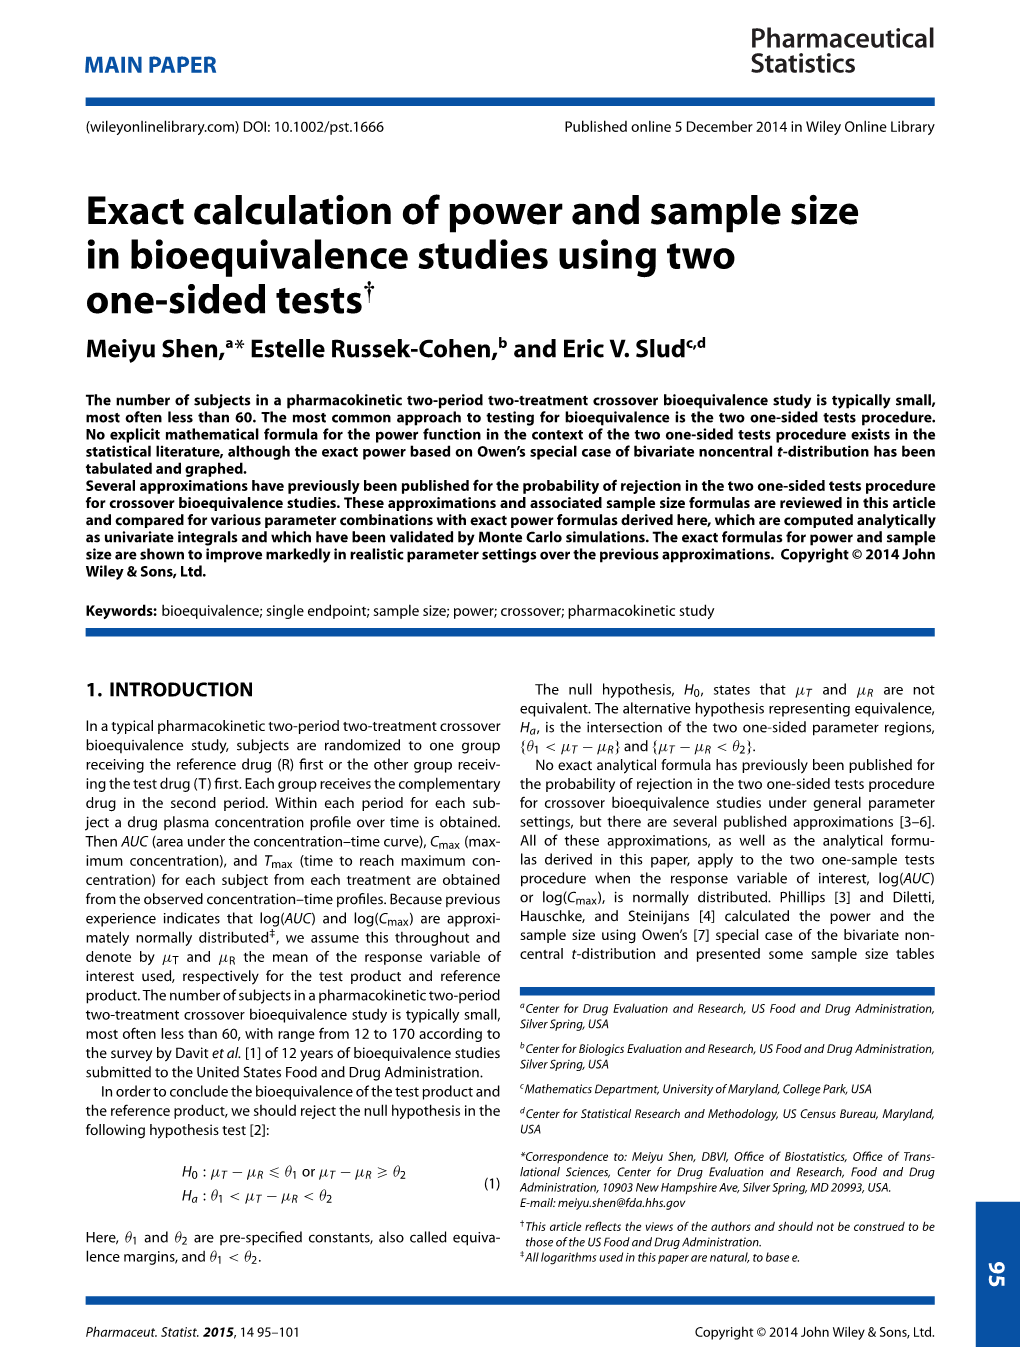 Exact Calculation of Power and Sample Size in Bioequivalence Studies Using Two One-Sided TestsŽ Meiyu Shen,A* Estelle Russek-Cohen,B and Eric V